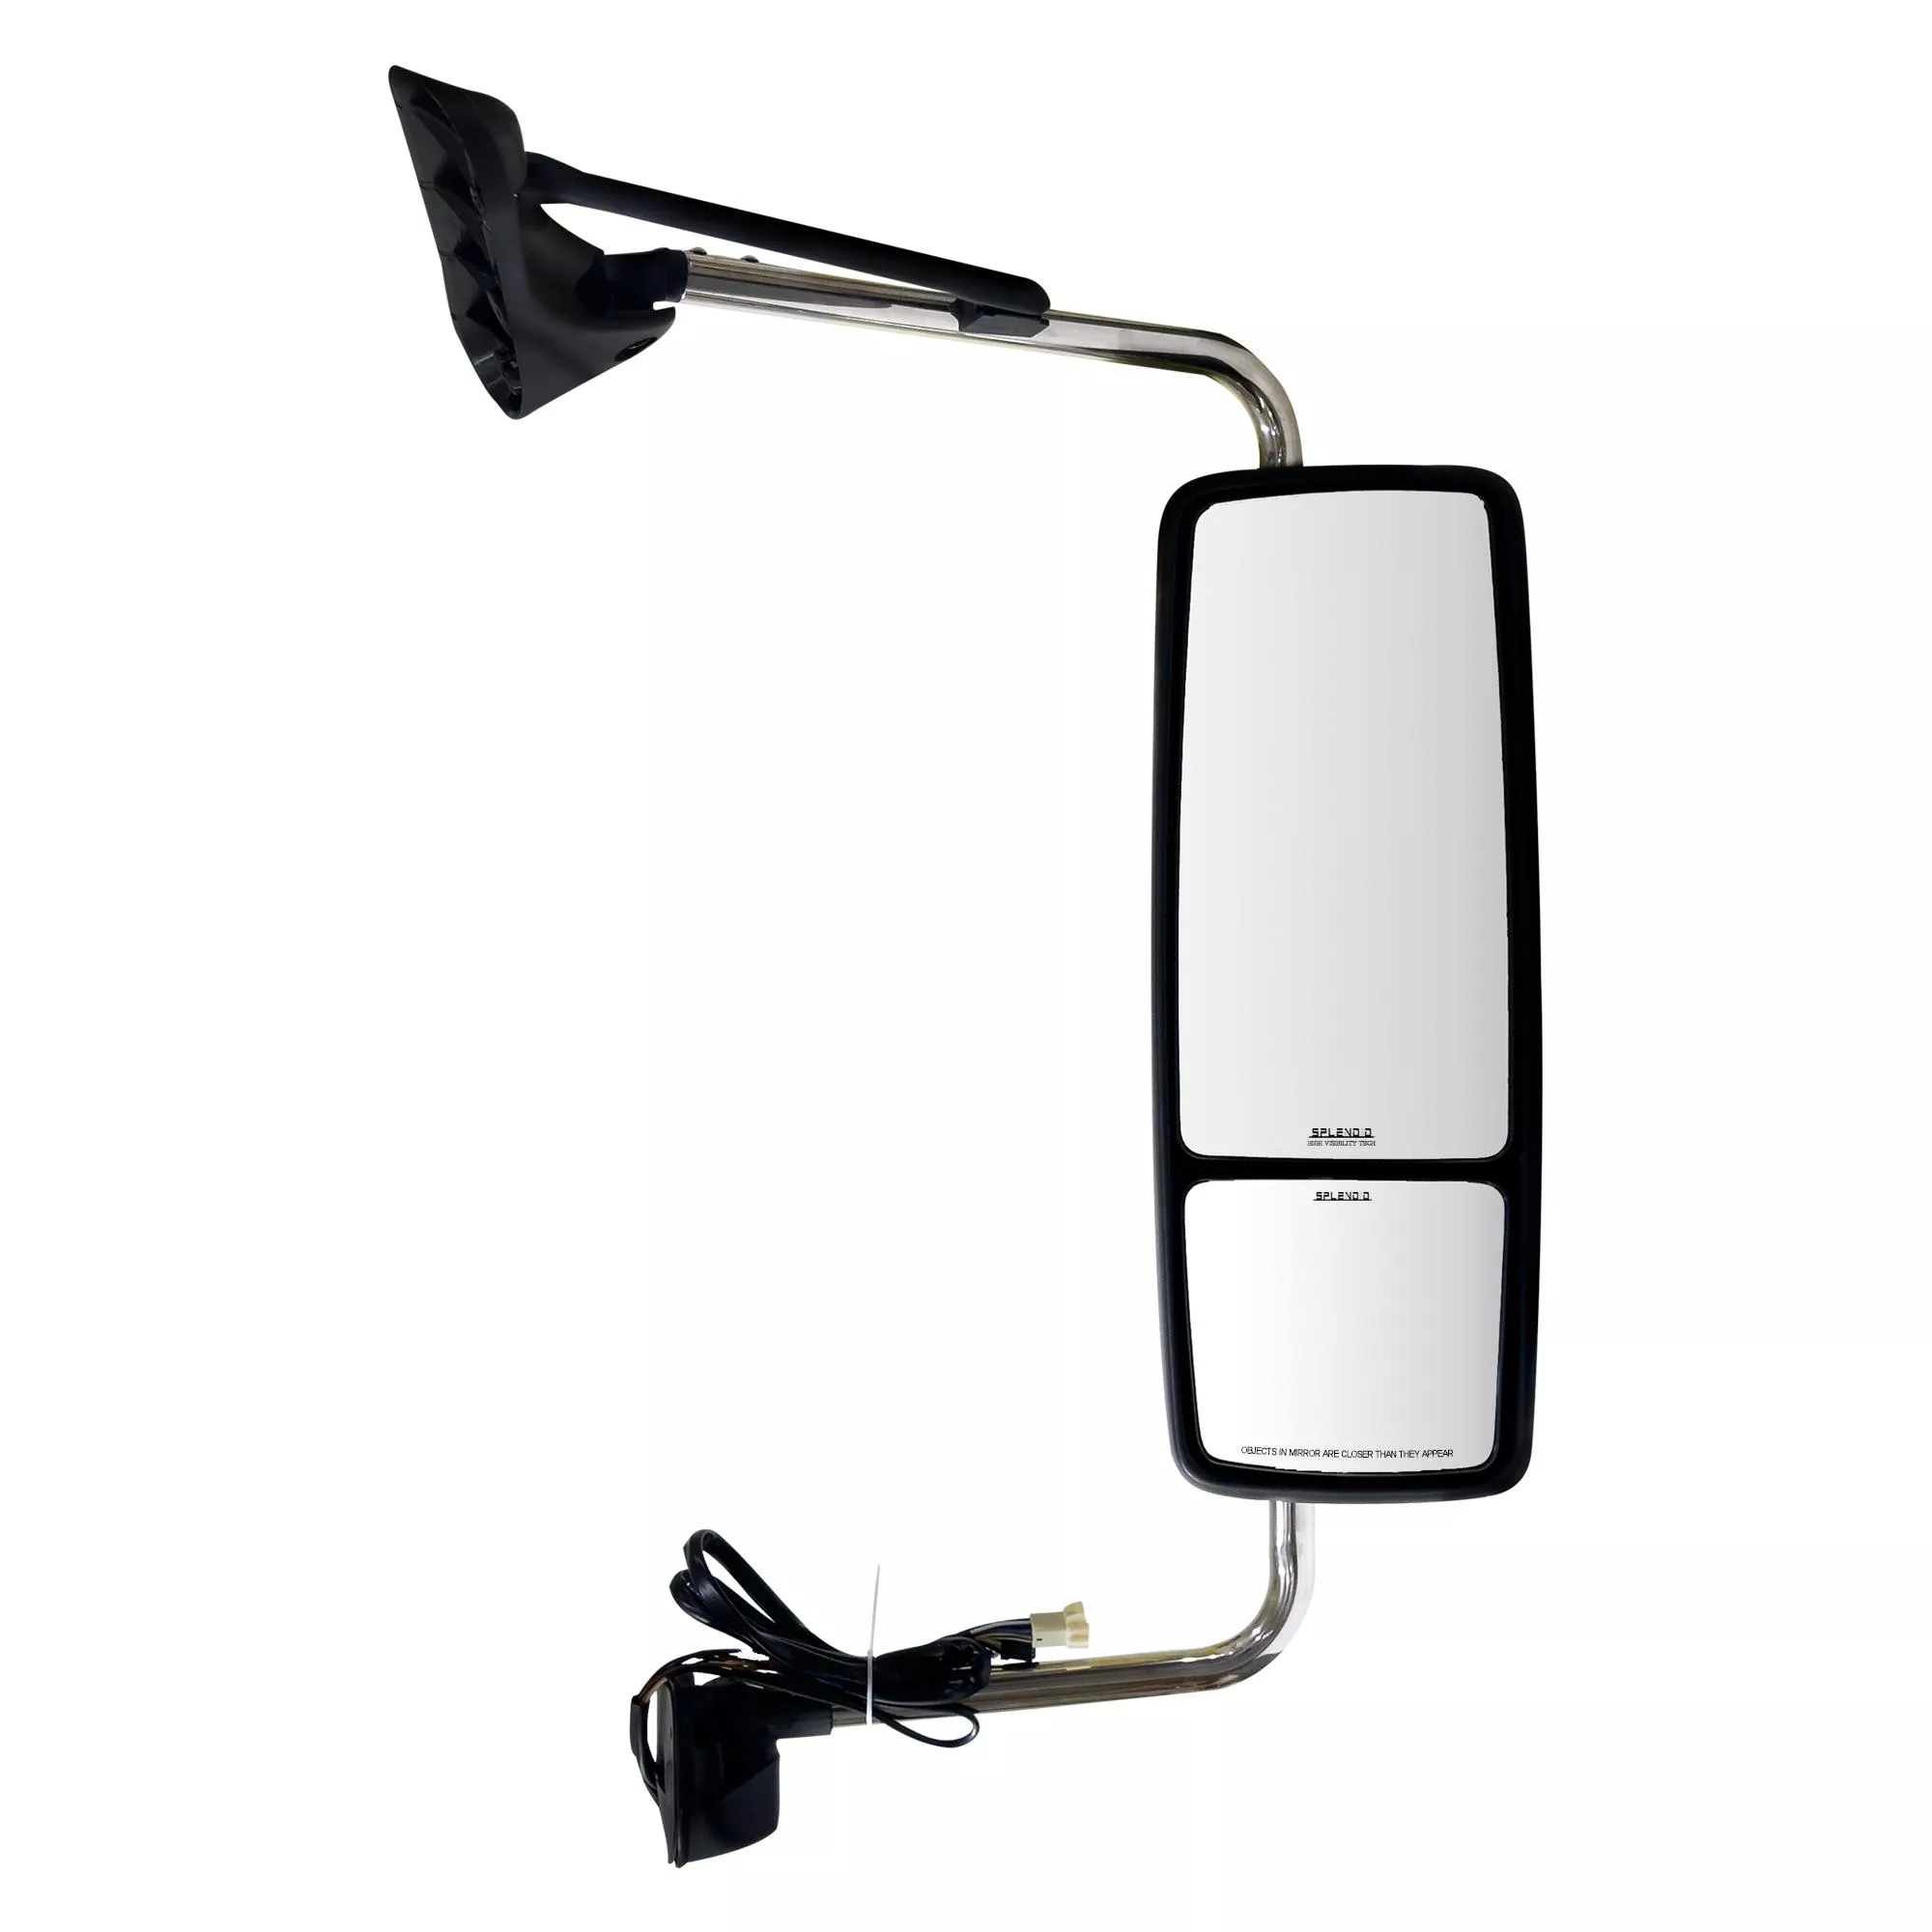 SPLENDID Replacement Side mirror, Power mirror, Heated with Turn Signals, Chrome cover, for 2002-2018 International Prostar Lonestar, Passenger Side